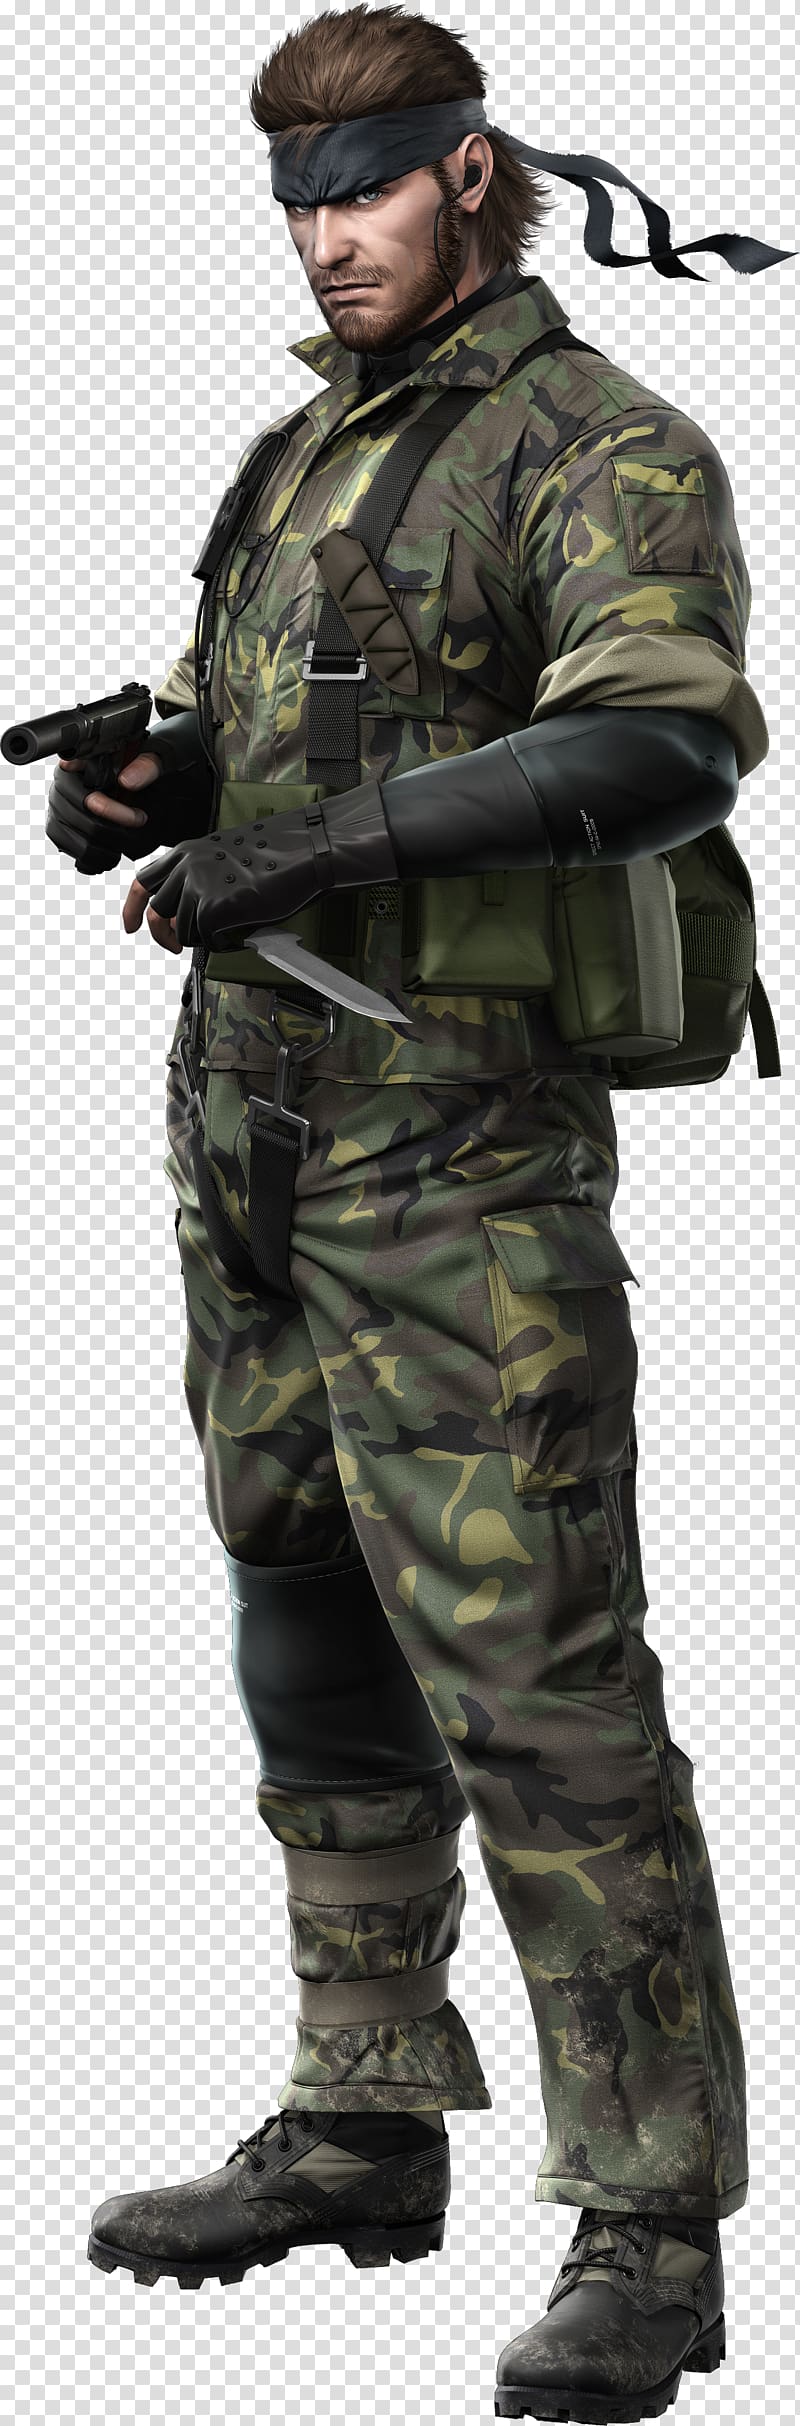 military male character holding pistol and knife, Metal Gear Solid 3: Snake Eater Metal Gear 2: Solid Snake Metal Gear Solid V: The Phantom Pain, metal gear transparent background PNG clipart